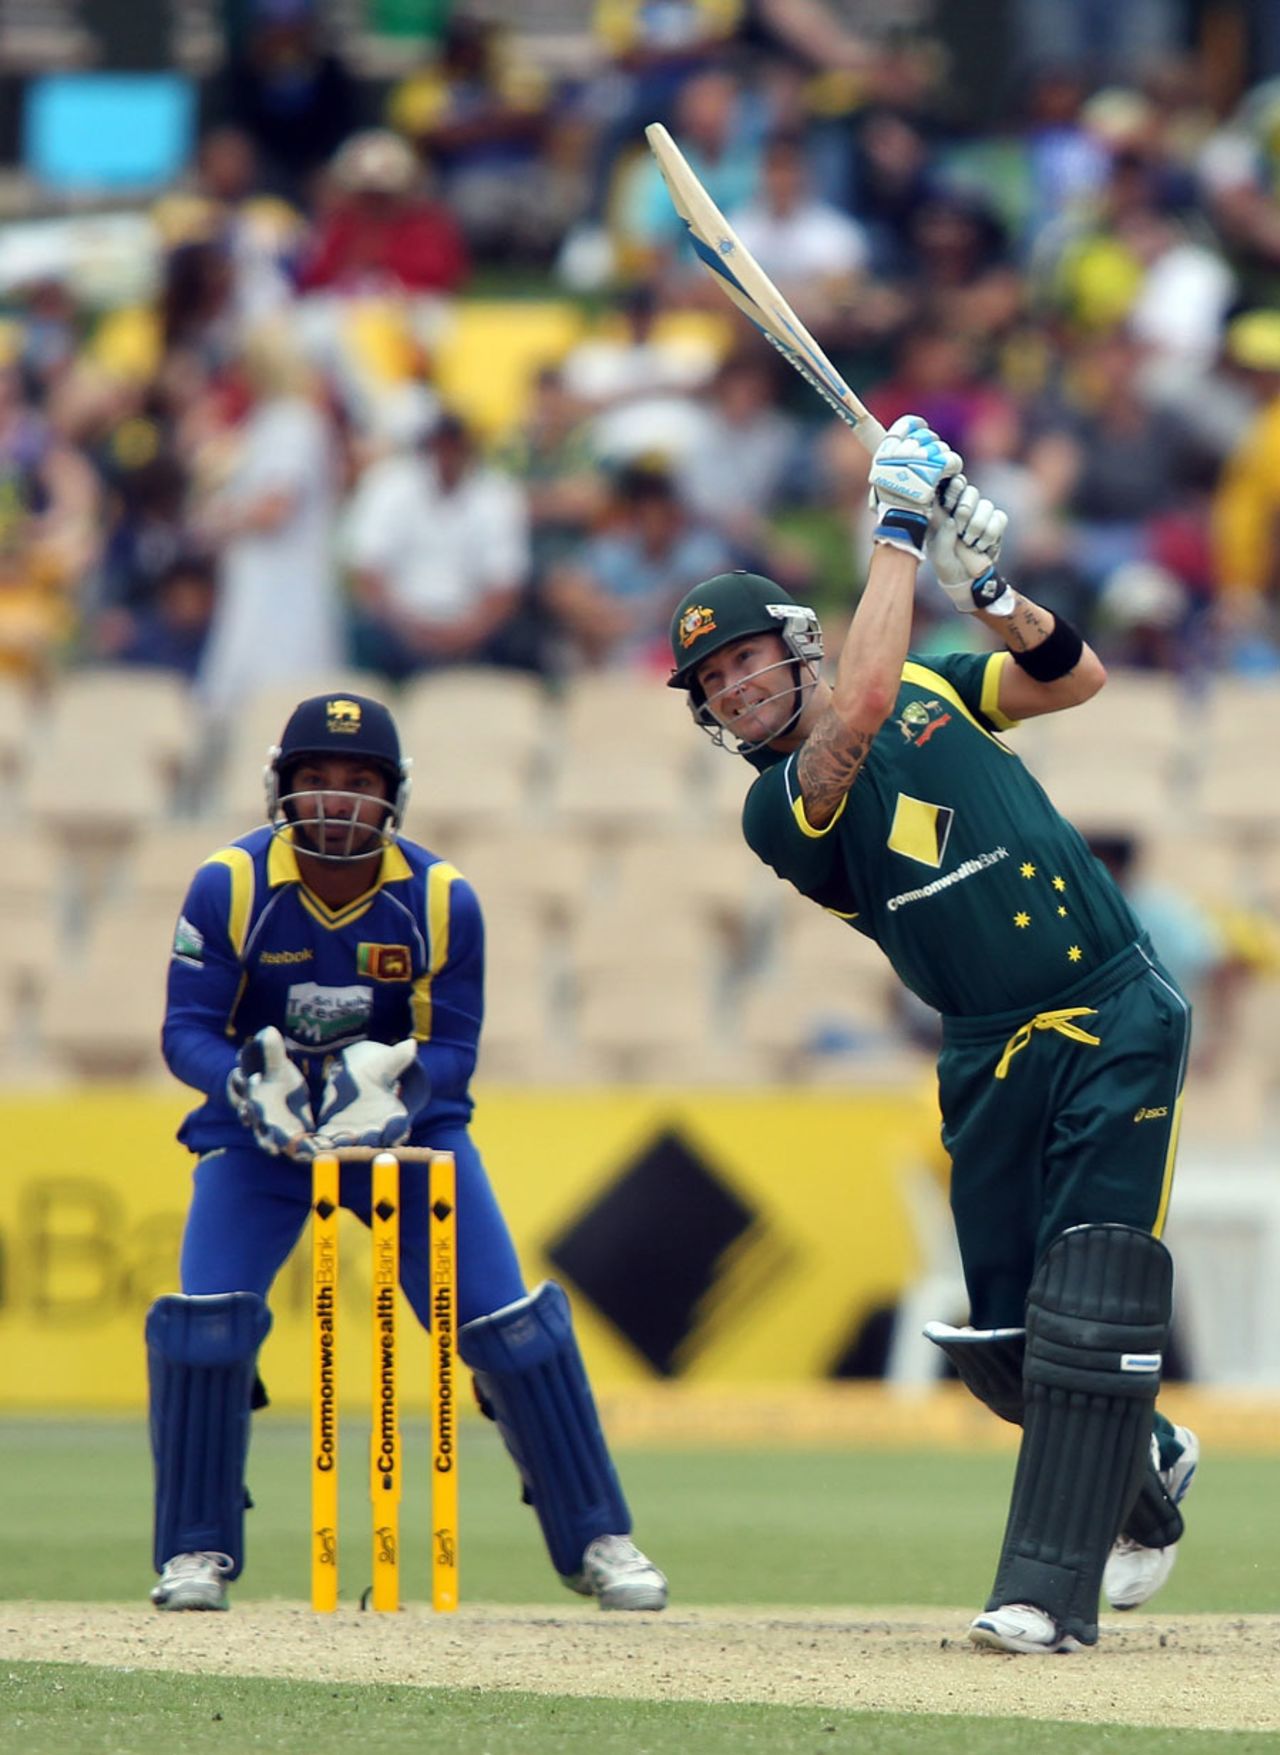 Michael Clarke launches into one, Australia v Sri Lanka, Commonwealth Bank Series, 2nd final, Adelaide, March 6, 2012 